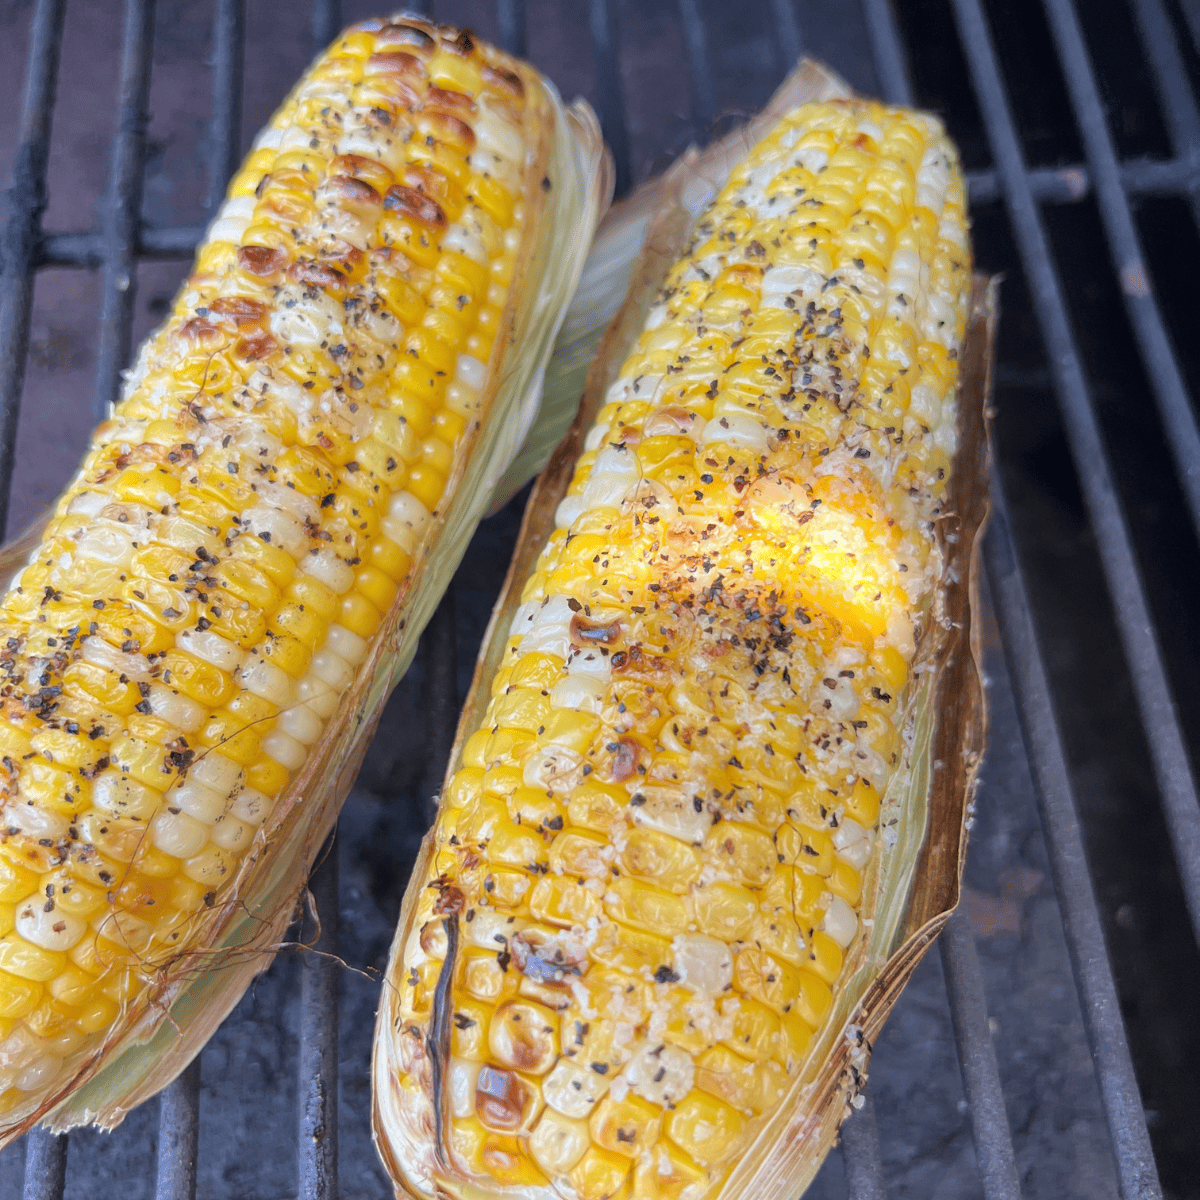 finished corn on the cob that has been cooked on a smoker.